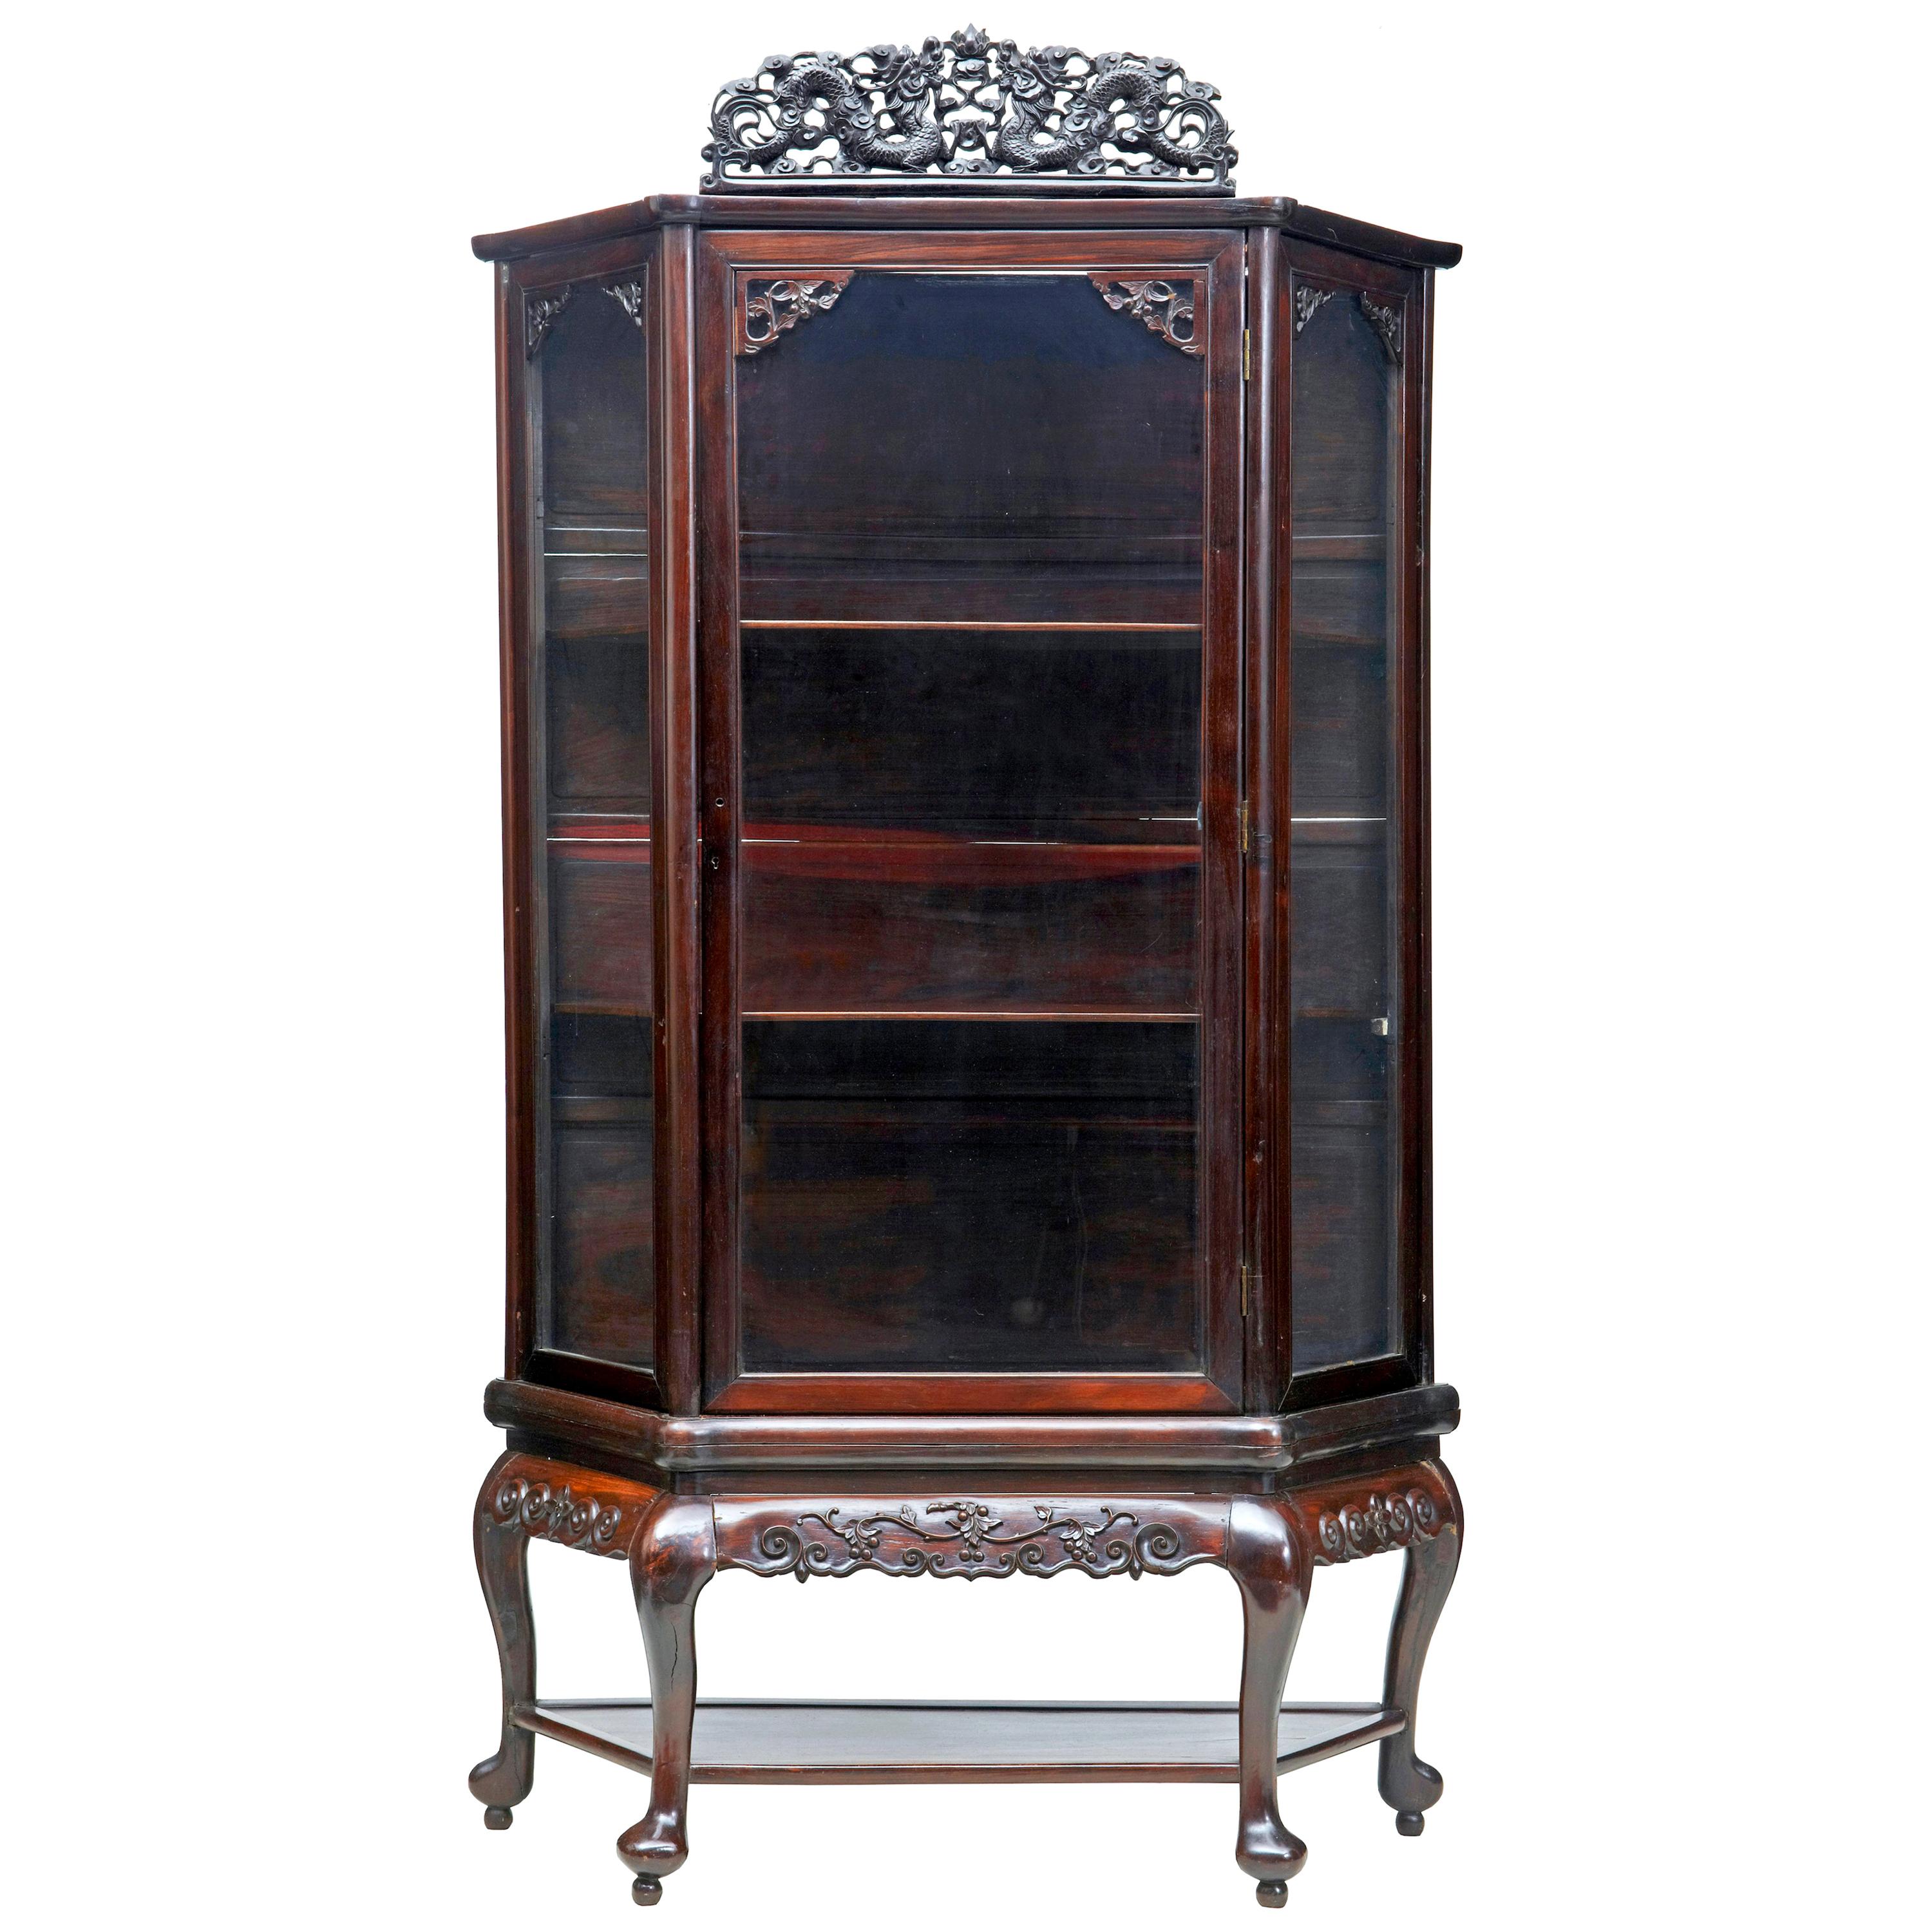 19th Century Chinese Carved Hardwood Glazed Display Cabinet